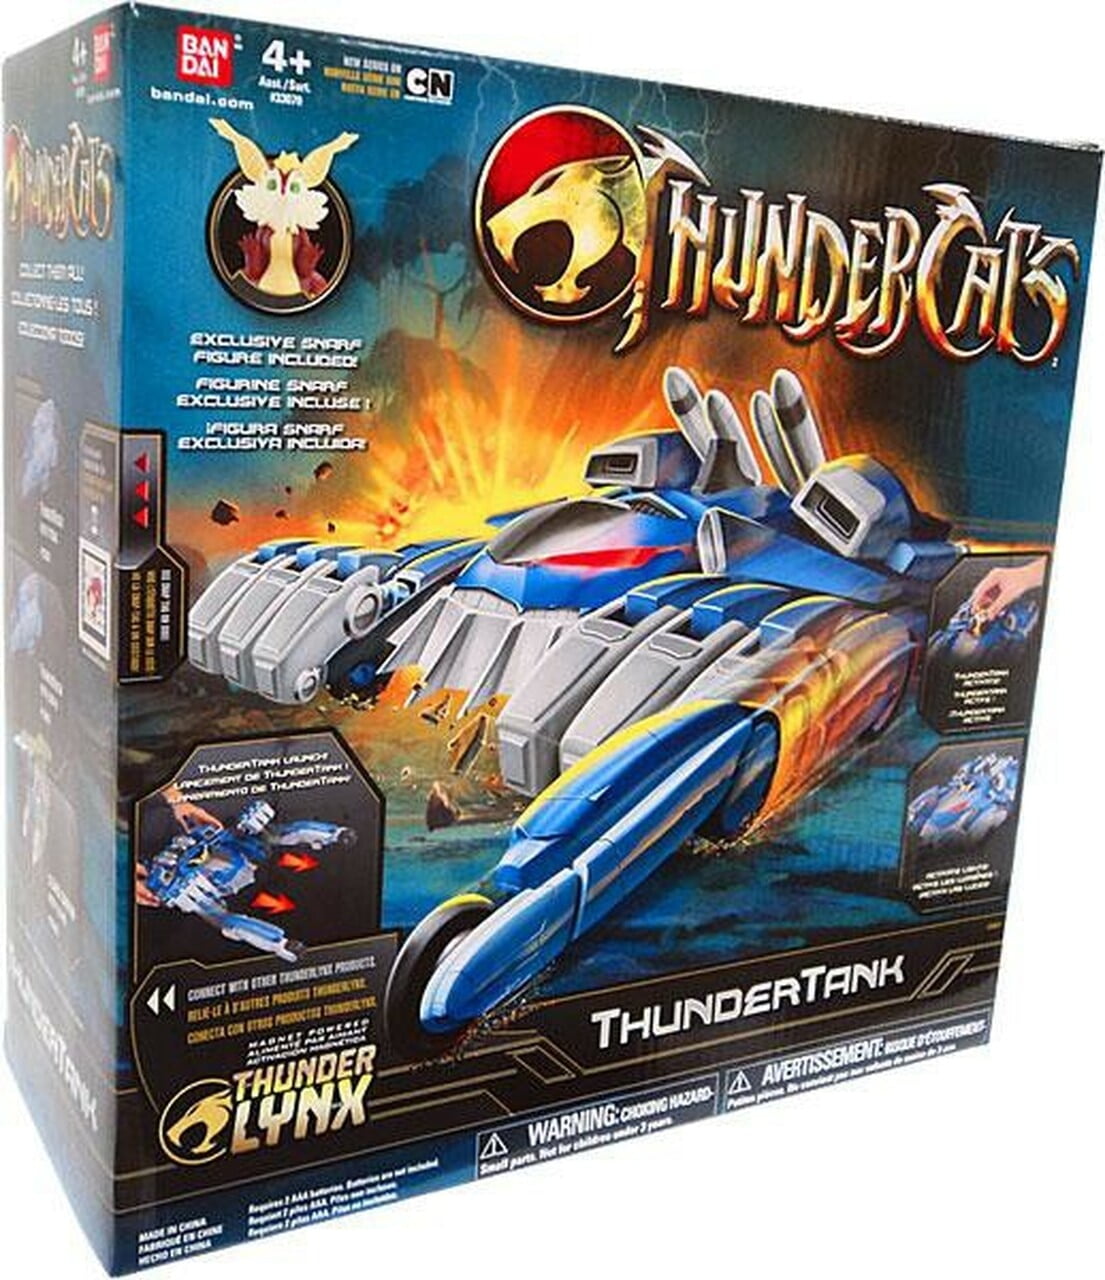 Bandai Thundercats Thundertank Deluxe Vehicle With Snarf Action Figure for sale online 